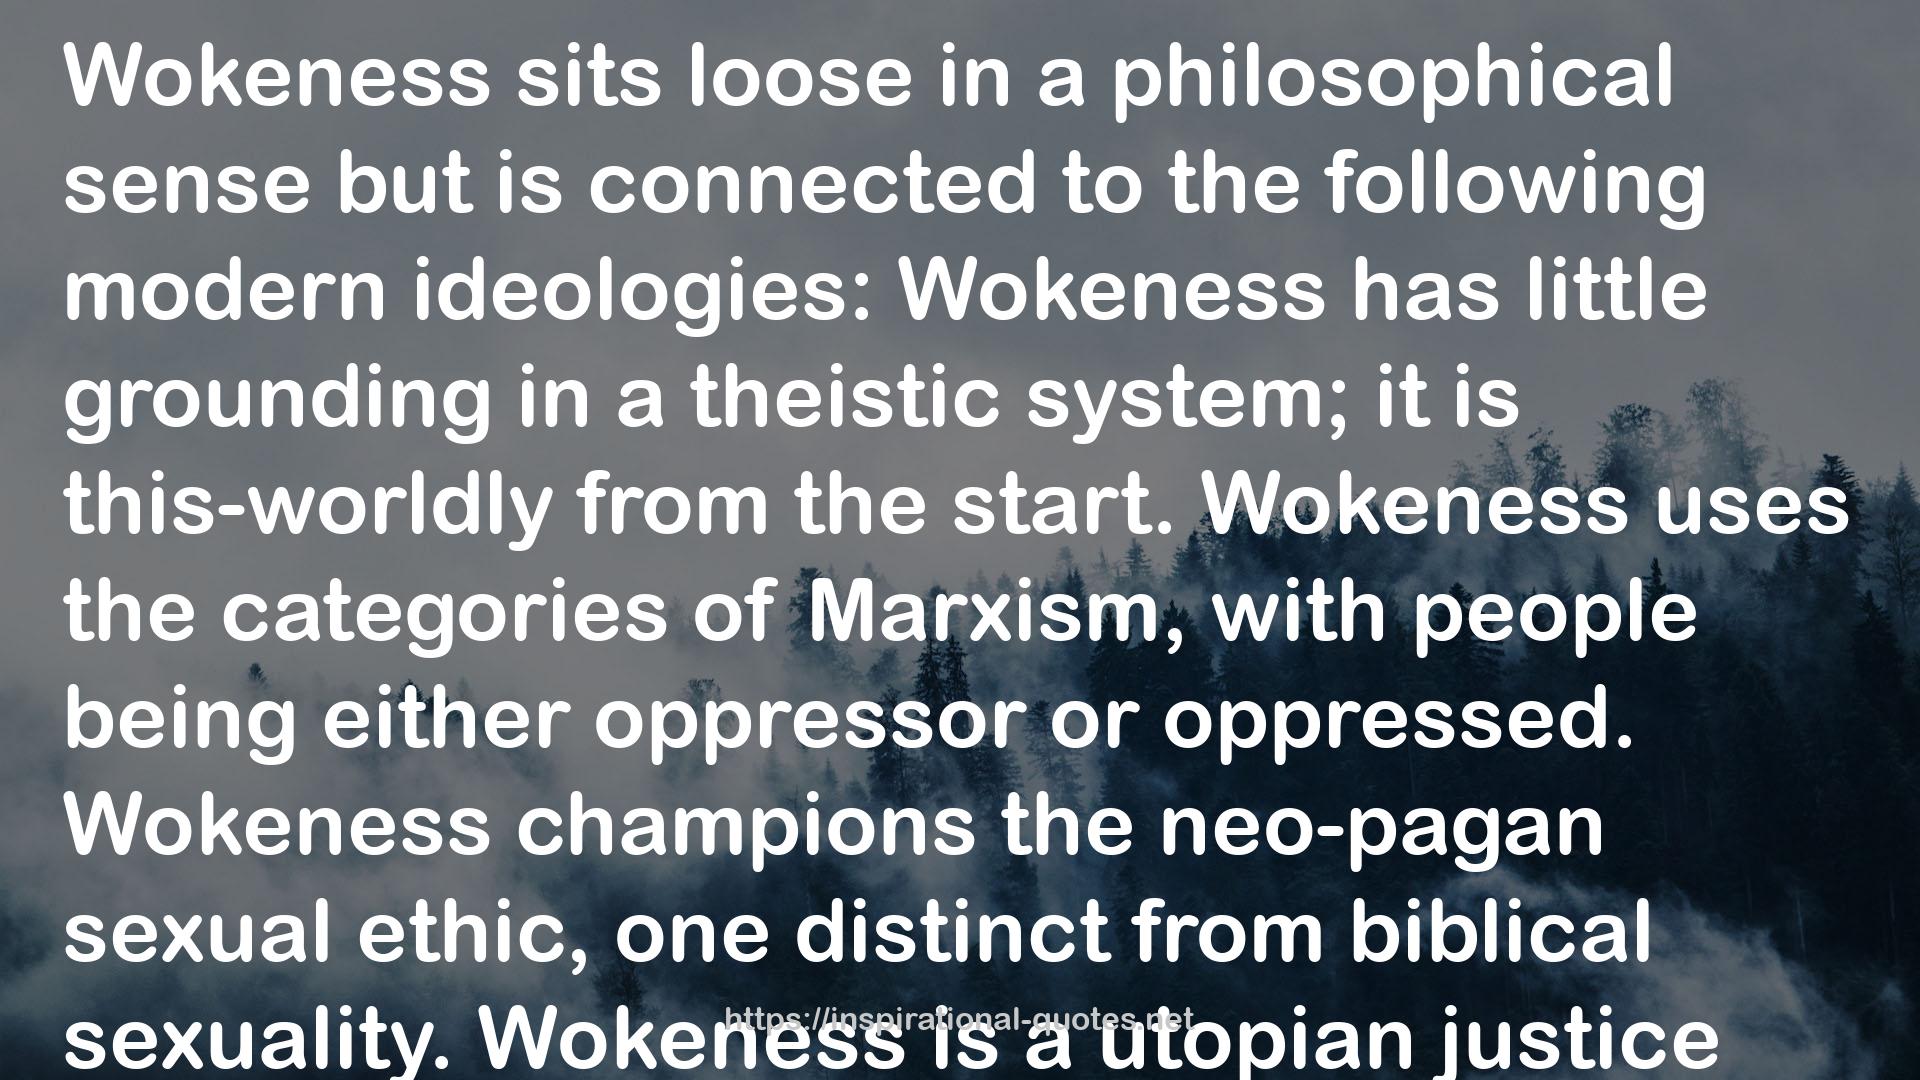 Christianity and Wokeness: How the Social Justice Movement is Hijacking the Gospel - and the Way to Stop It QUOTES